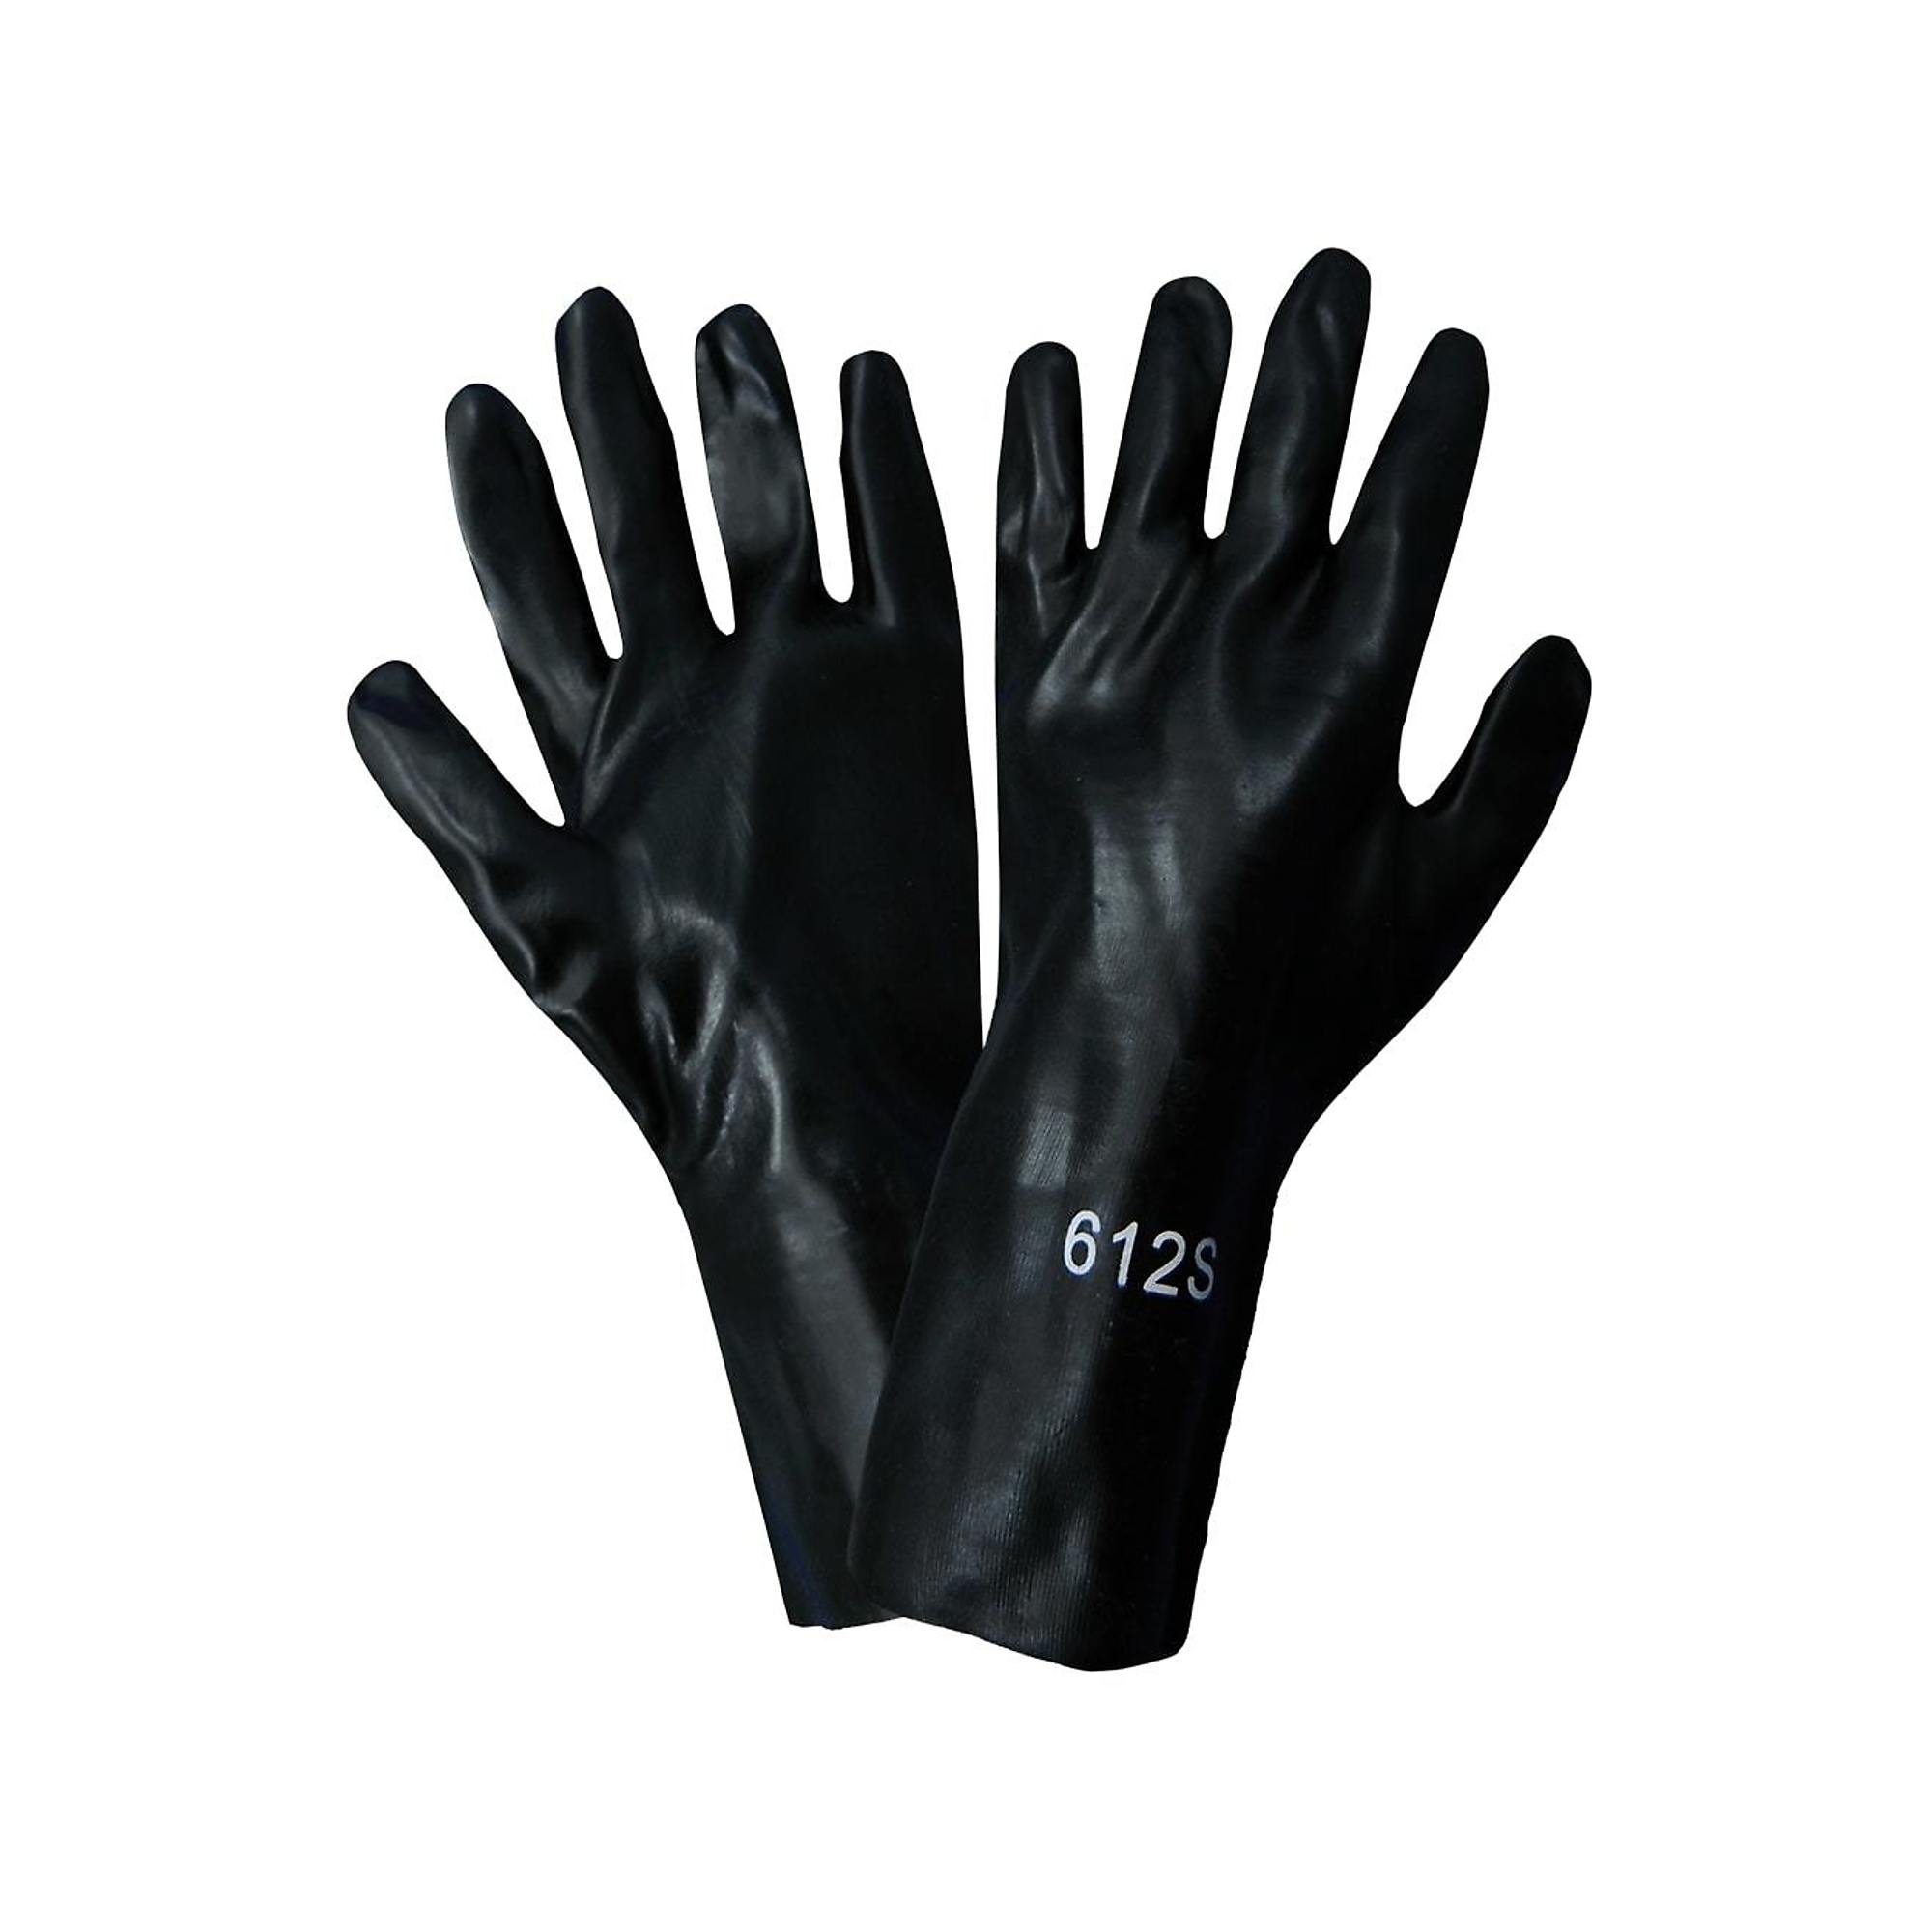 Global Glove, Black, 12Inch PVC, Cotton Liner, Solvent Gloves - 12 Pairs, Size One Size, Color Black, Included (qty.) 12 Model 612S